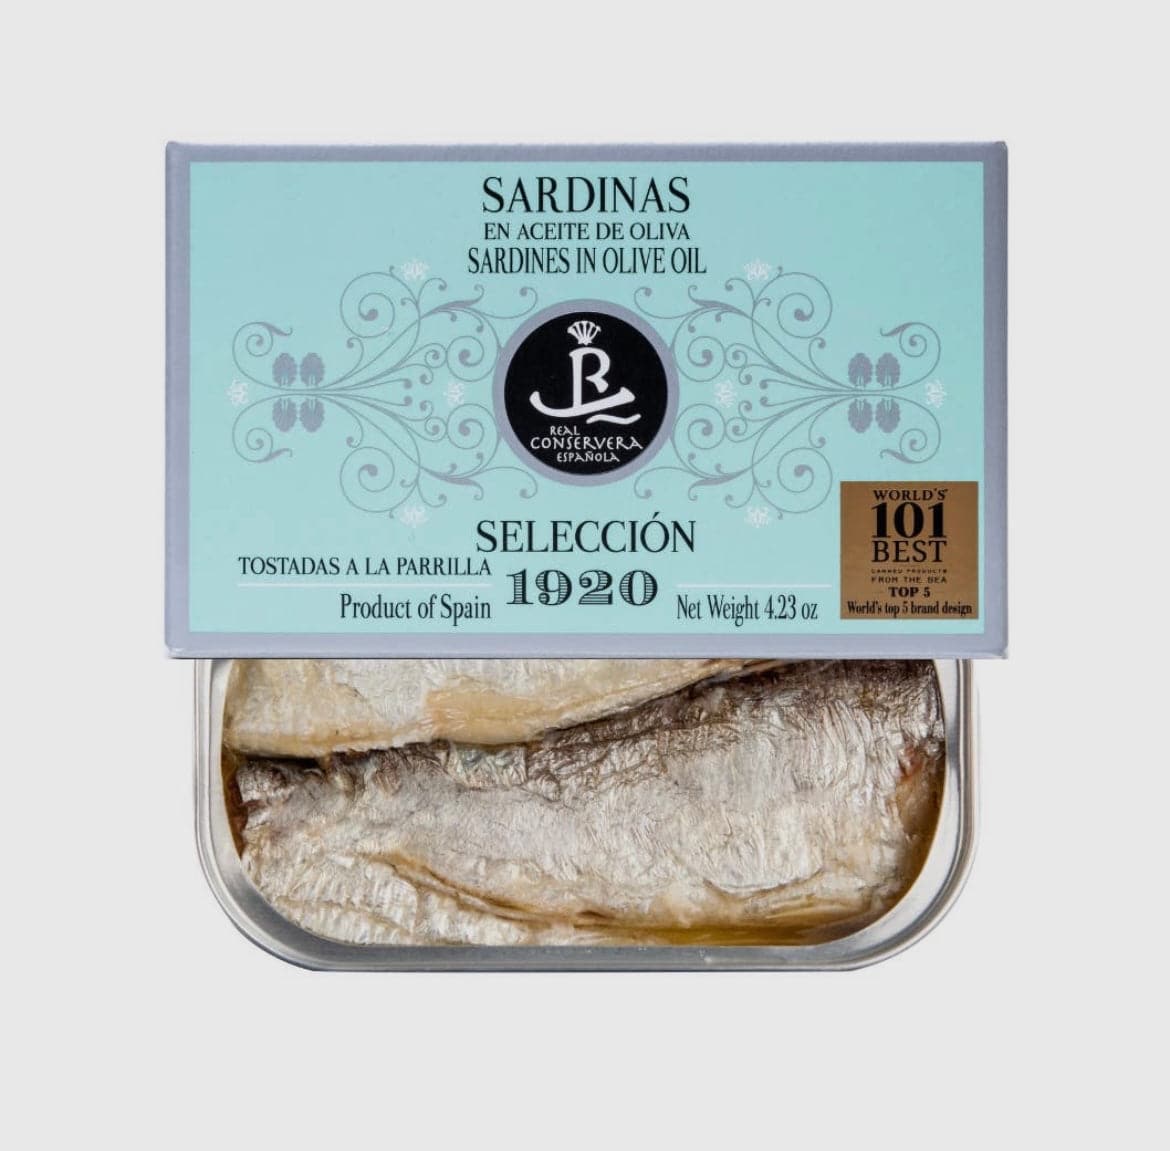 a opened can with sardines in olive oil